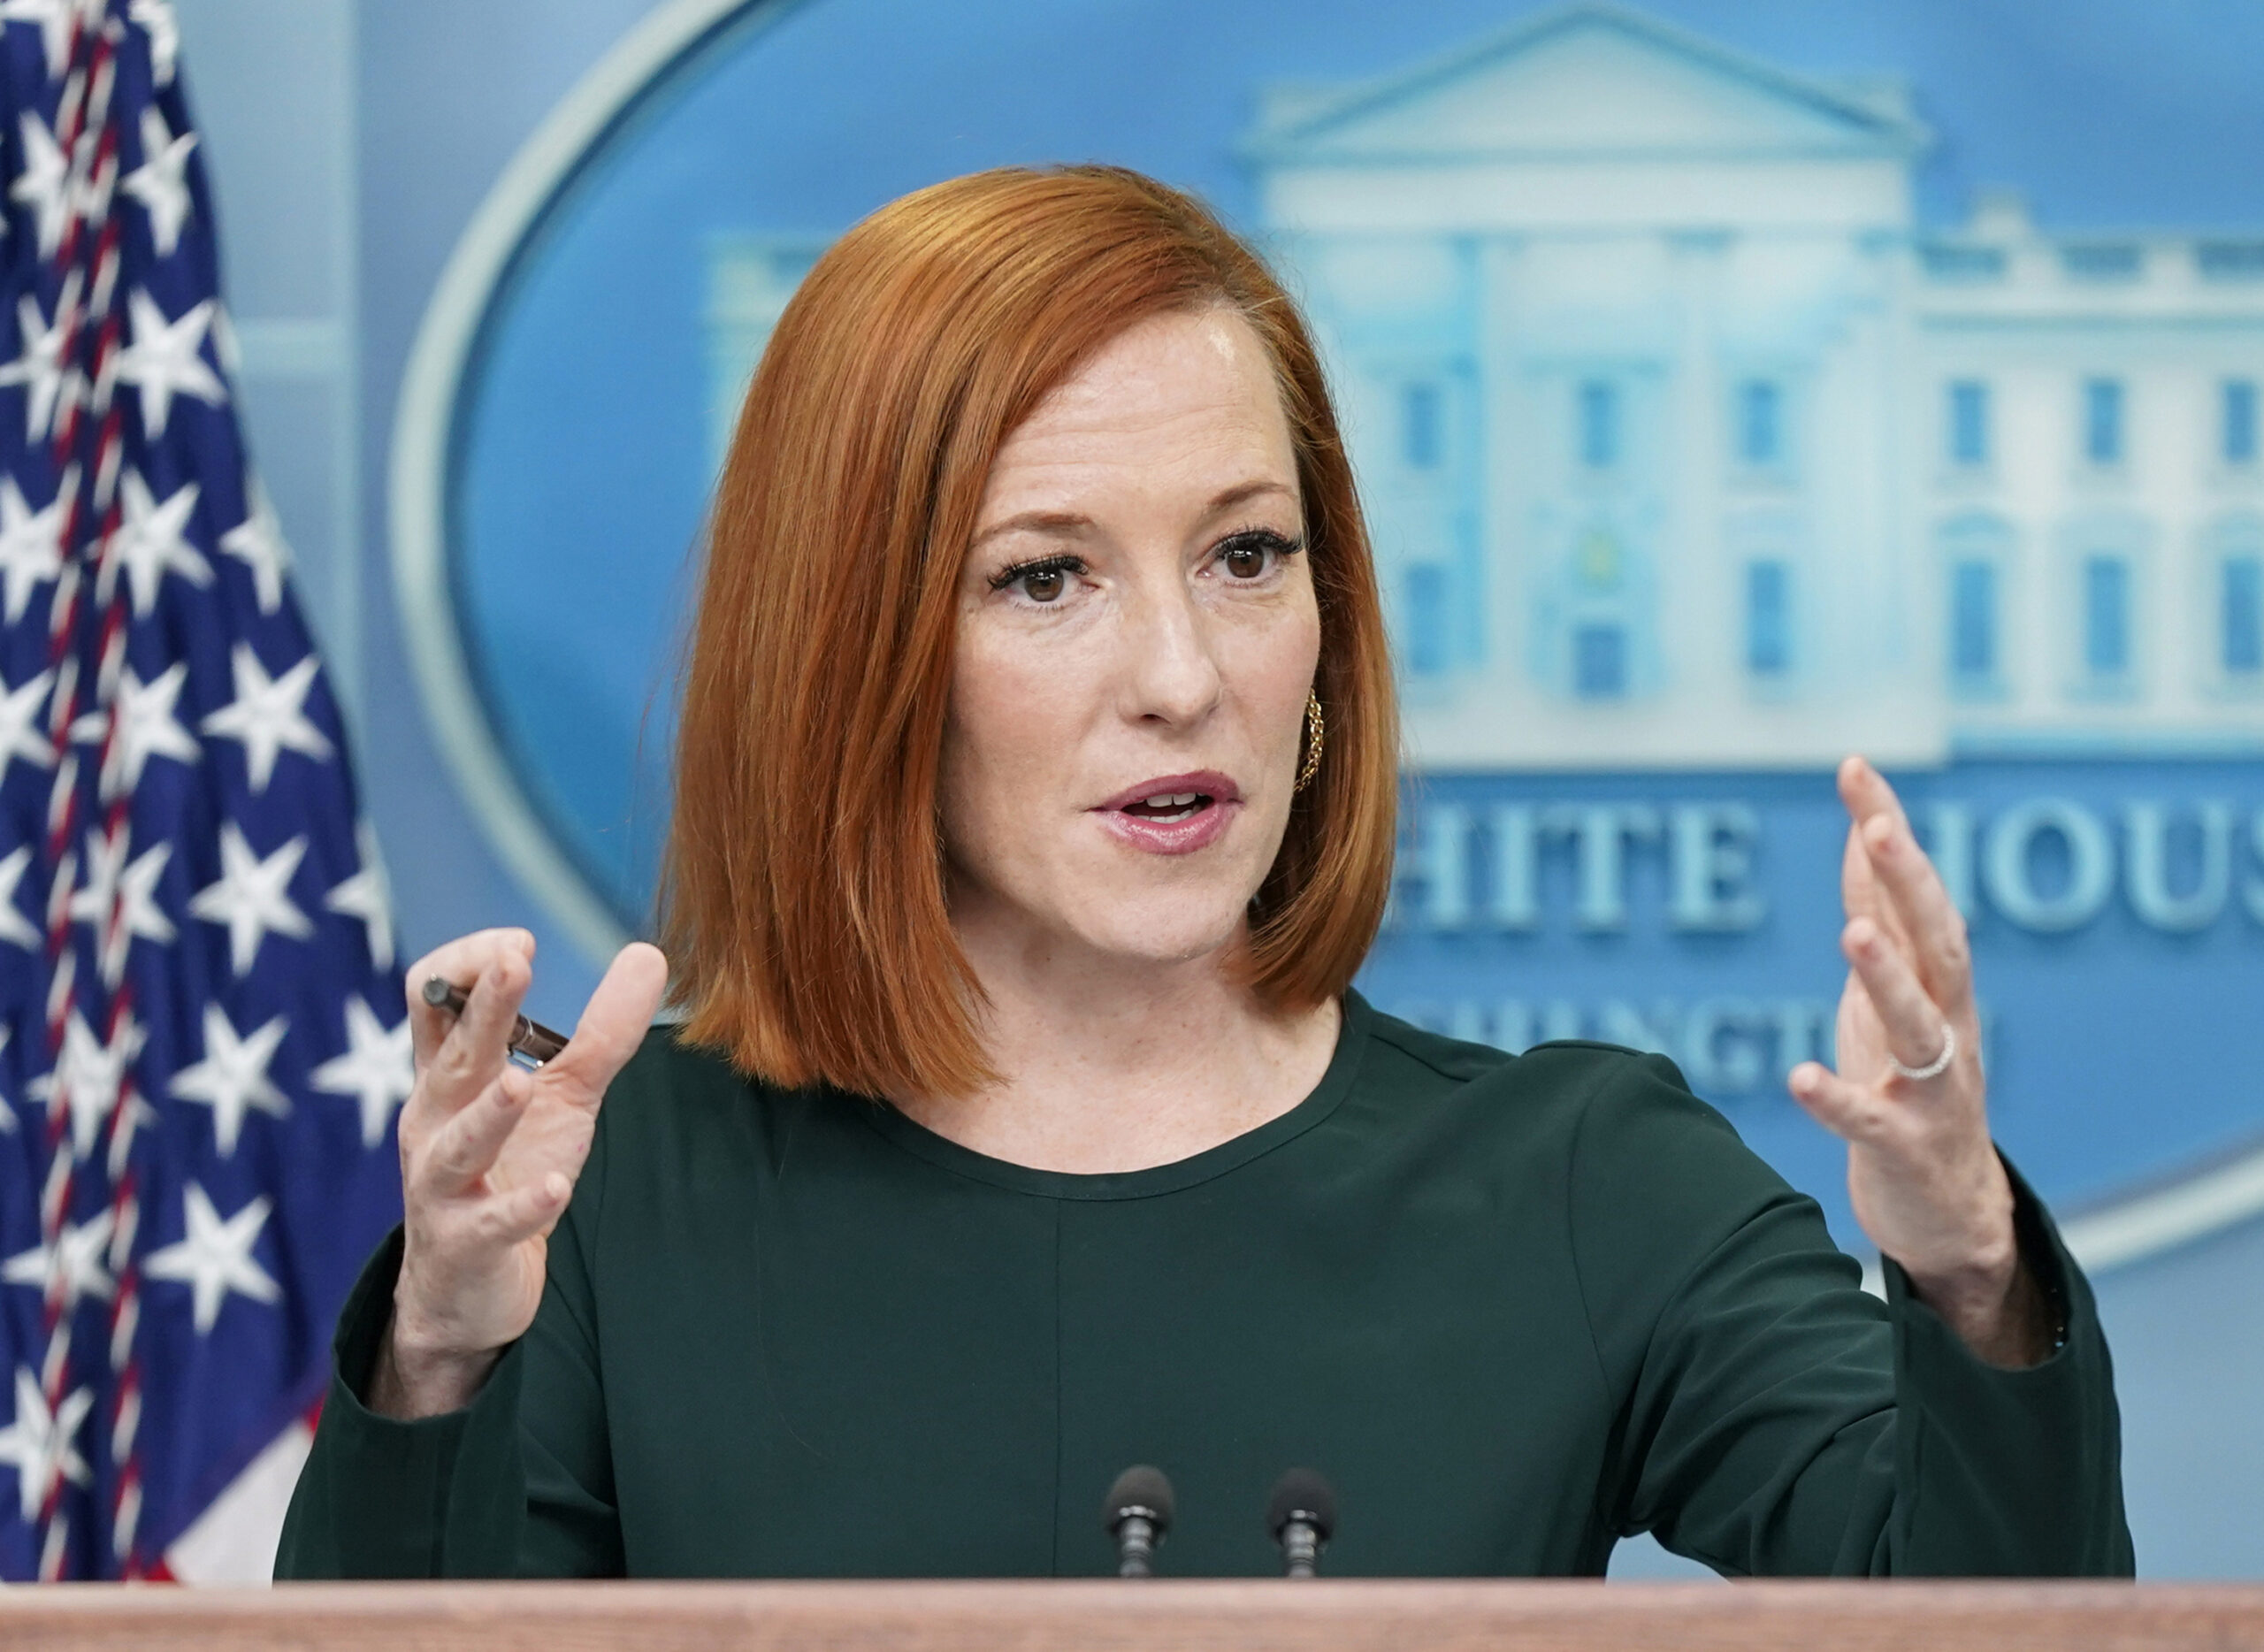 FILE - White House press secretary Jen Psaki speaks during a press briefing at the White House in Washington on March 9, 2022. Psaki has officially landed at MSNBC, where she is expected to make appearances on the network’s cable and streaming programs as well as host a new original show. Psaki will also appear on NBC and during MSNBC’s primetime special election programming throughout the midterms and 2024 presidential election. (AP Photo/Patrick Semansky, File)